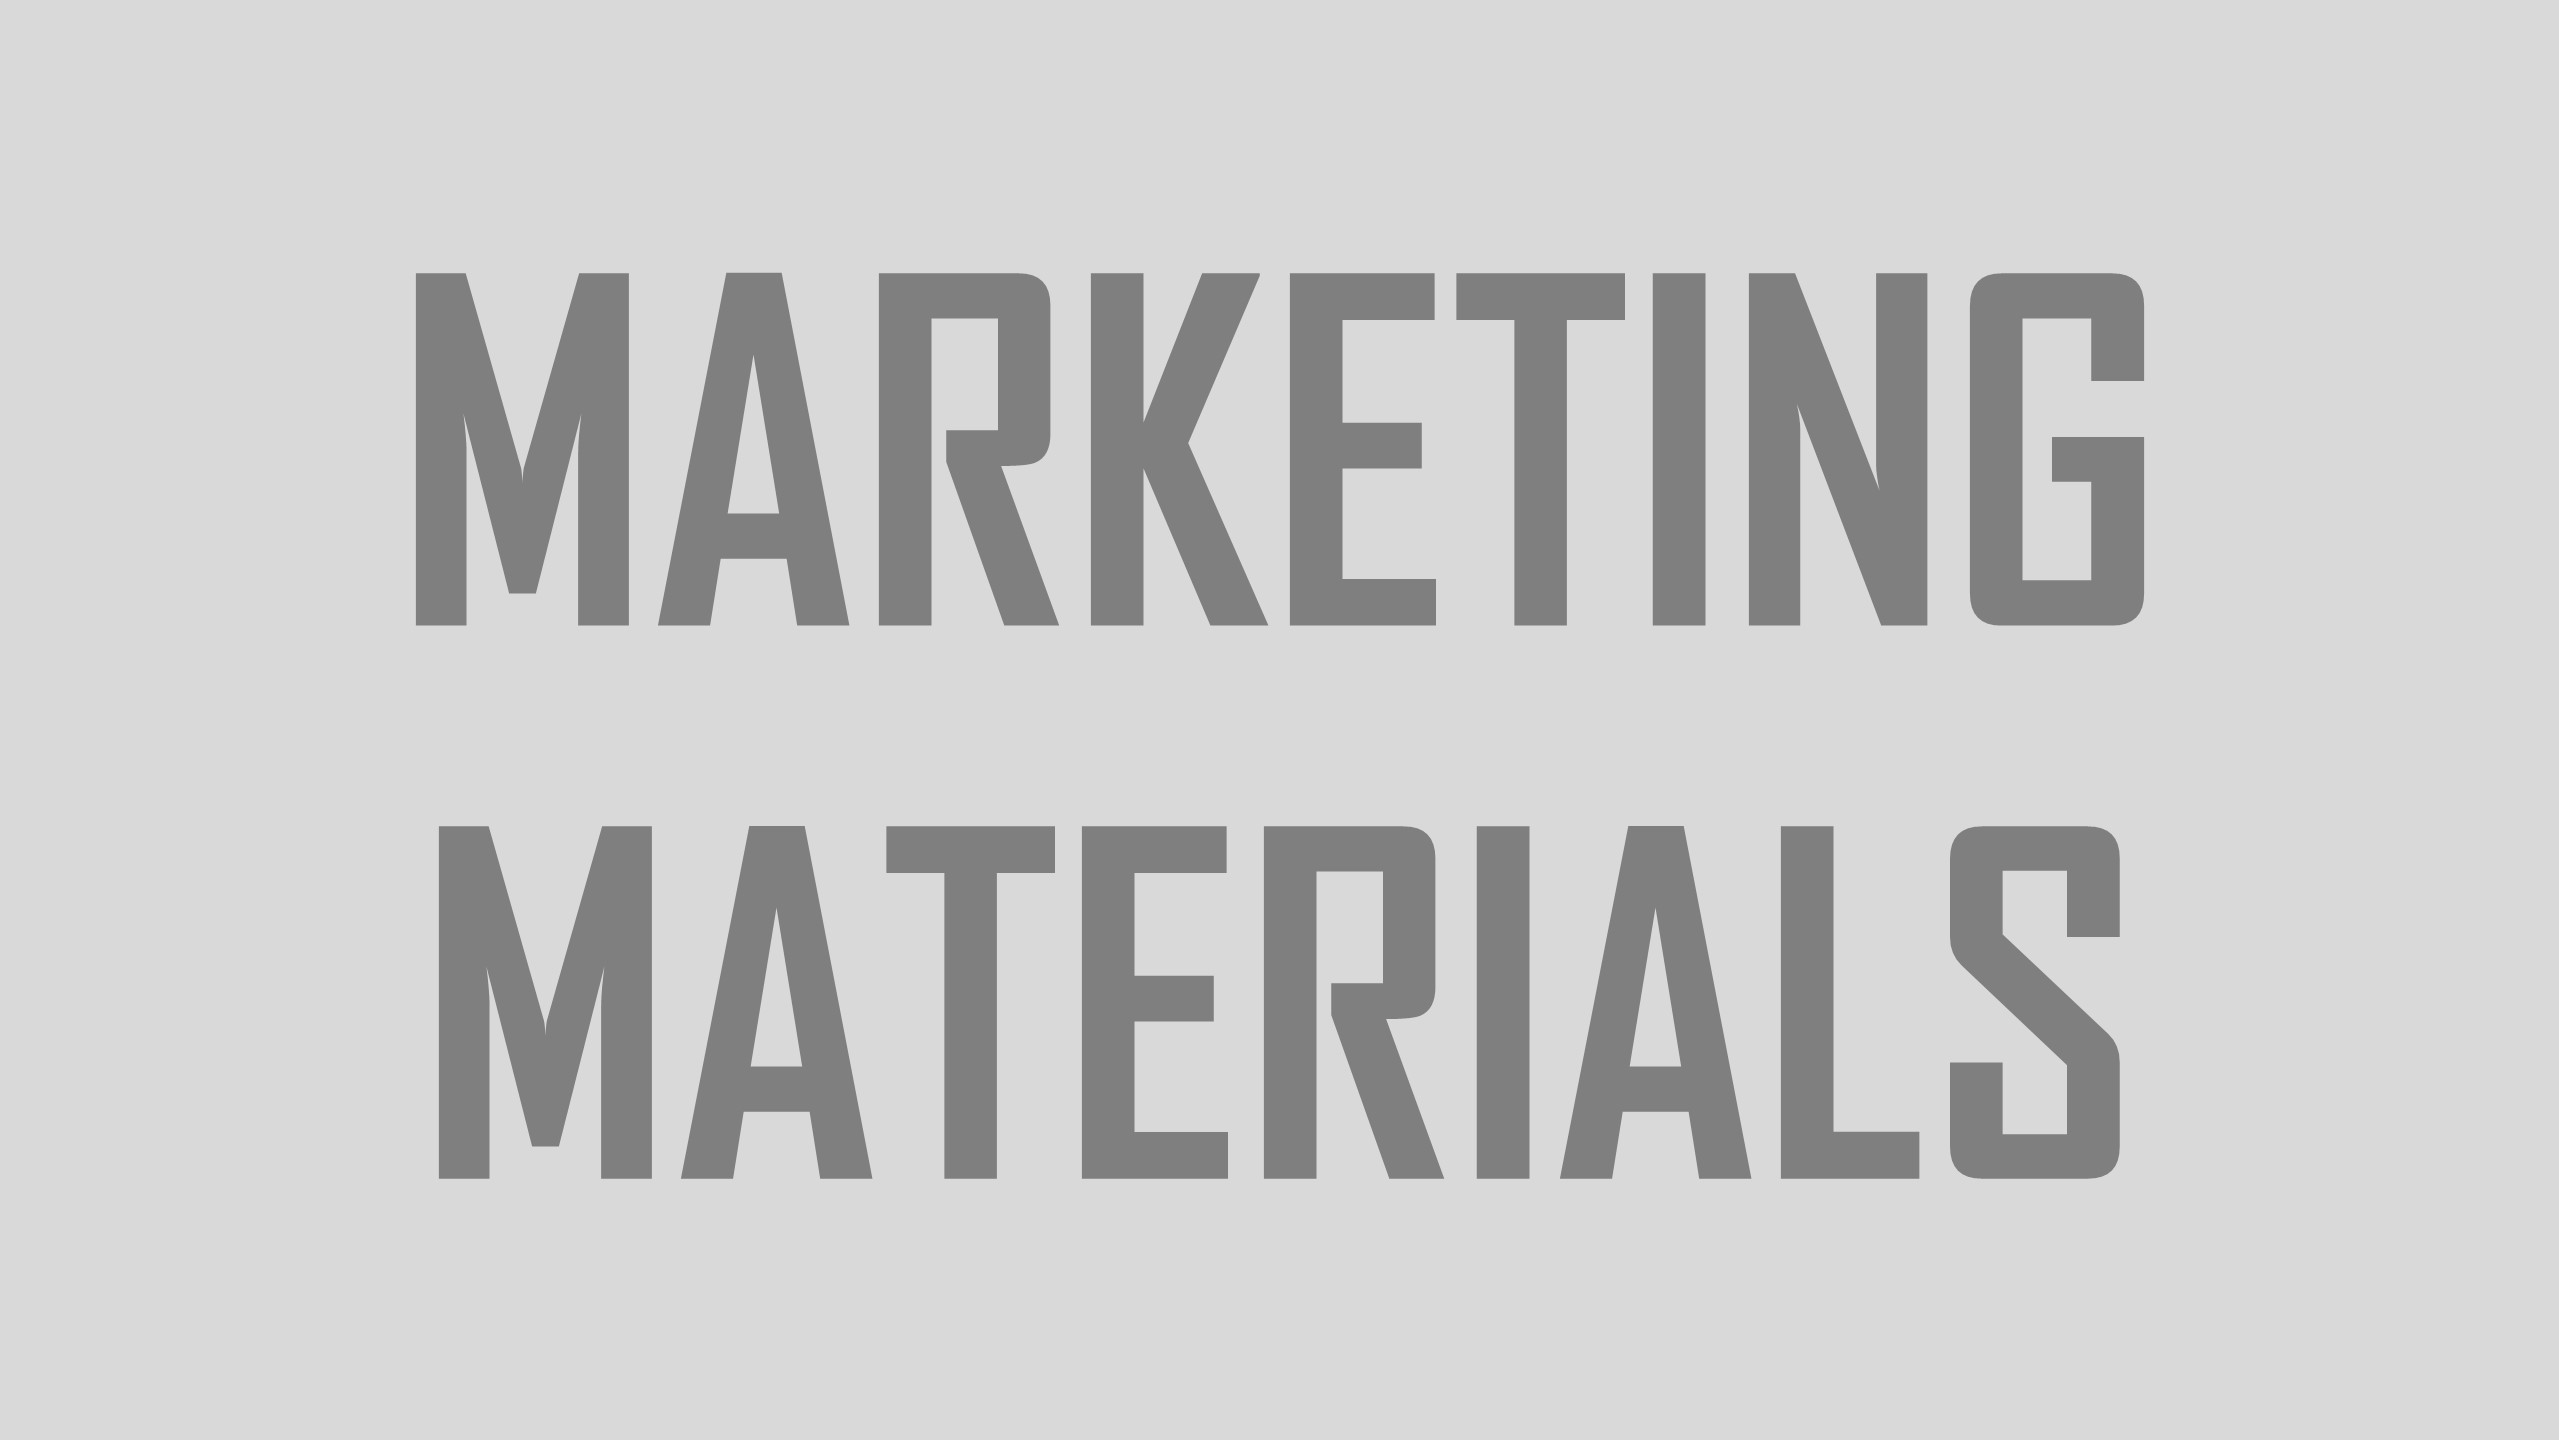 Marketing Materials - Marketing Collateral to Support Distributors & Retailers